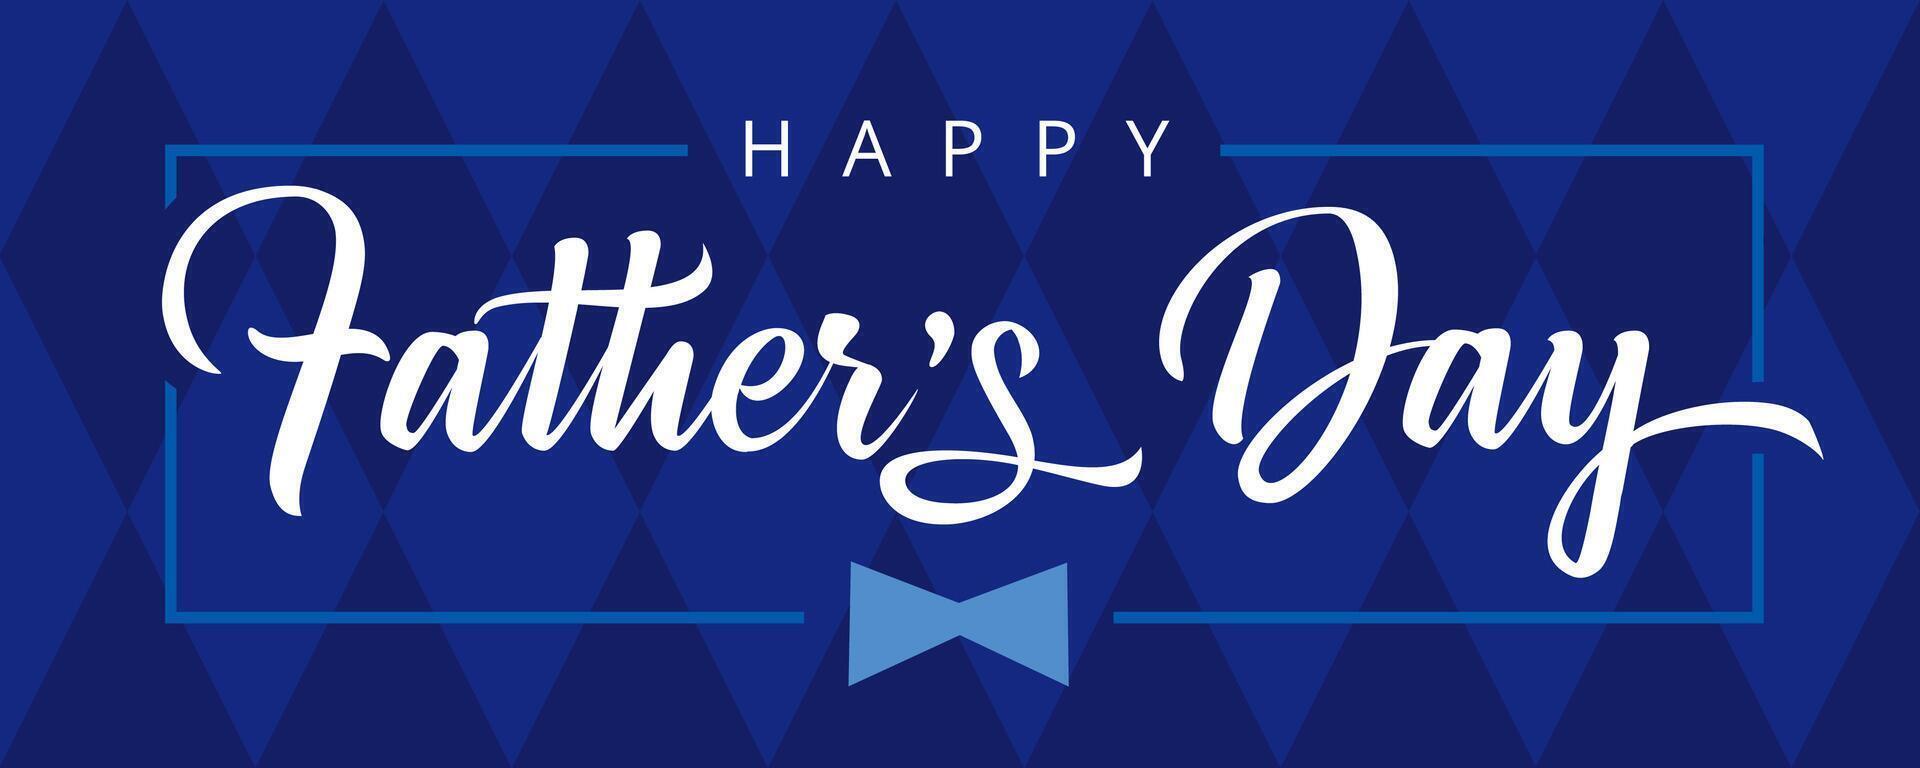 Happy Father's Day postcard template with geometric background. Horizontal banner. Web button vector